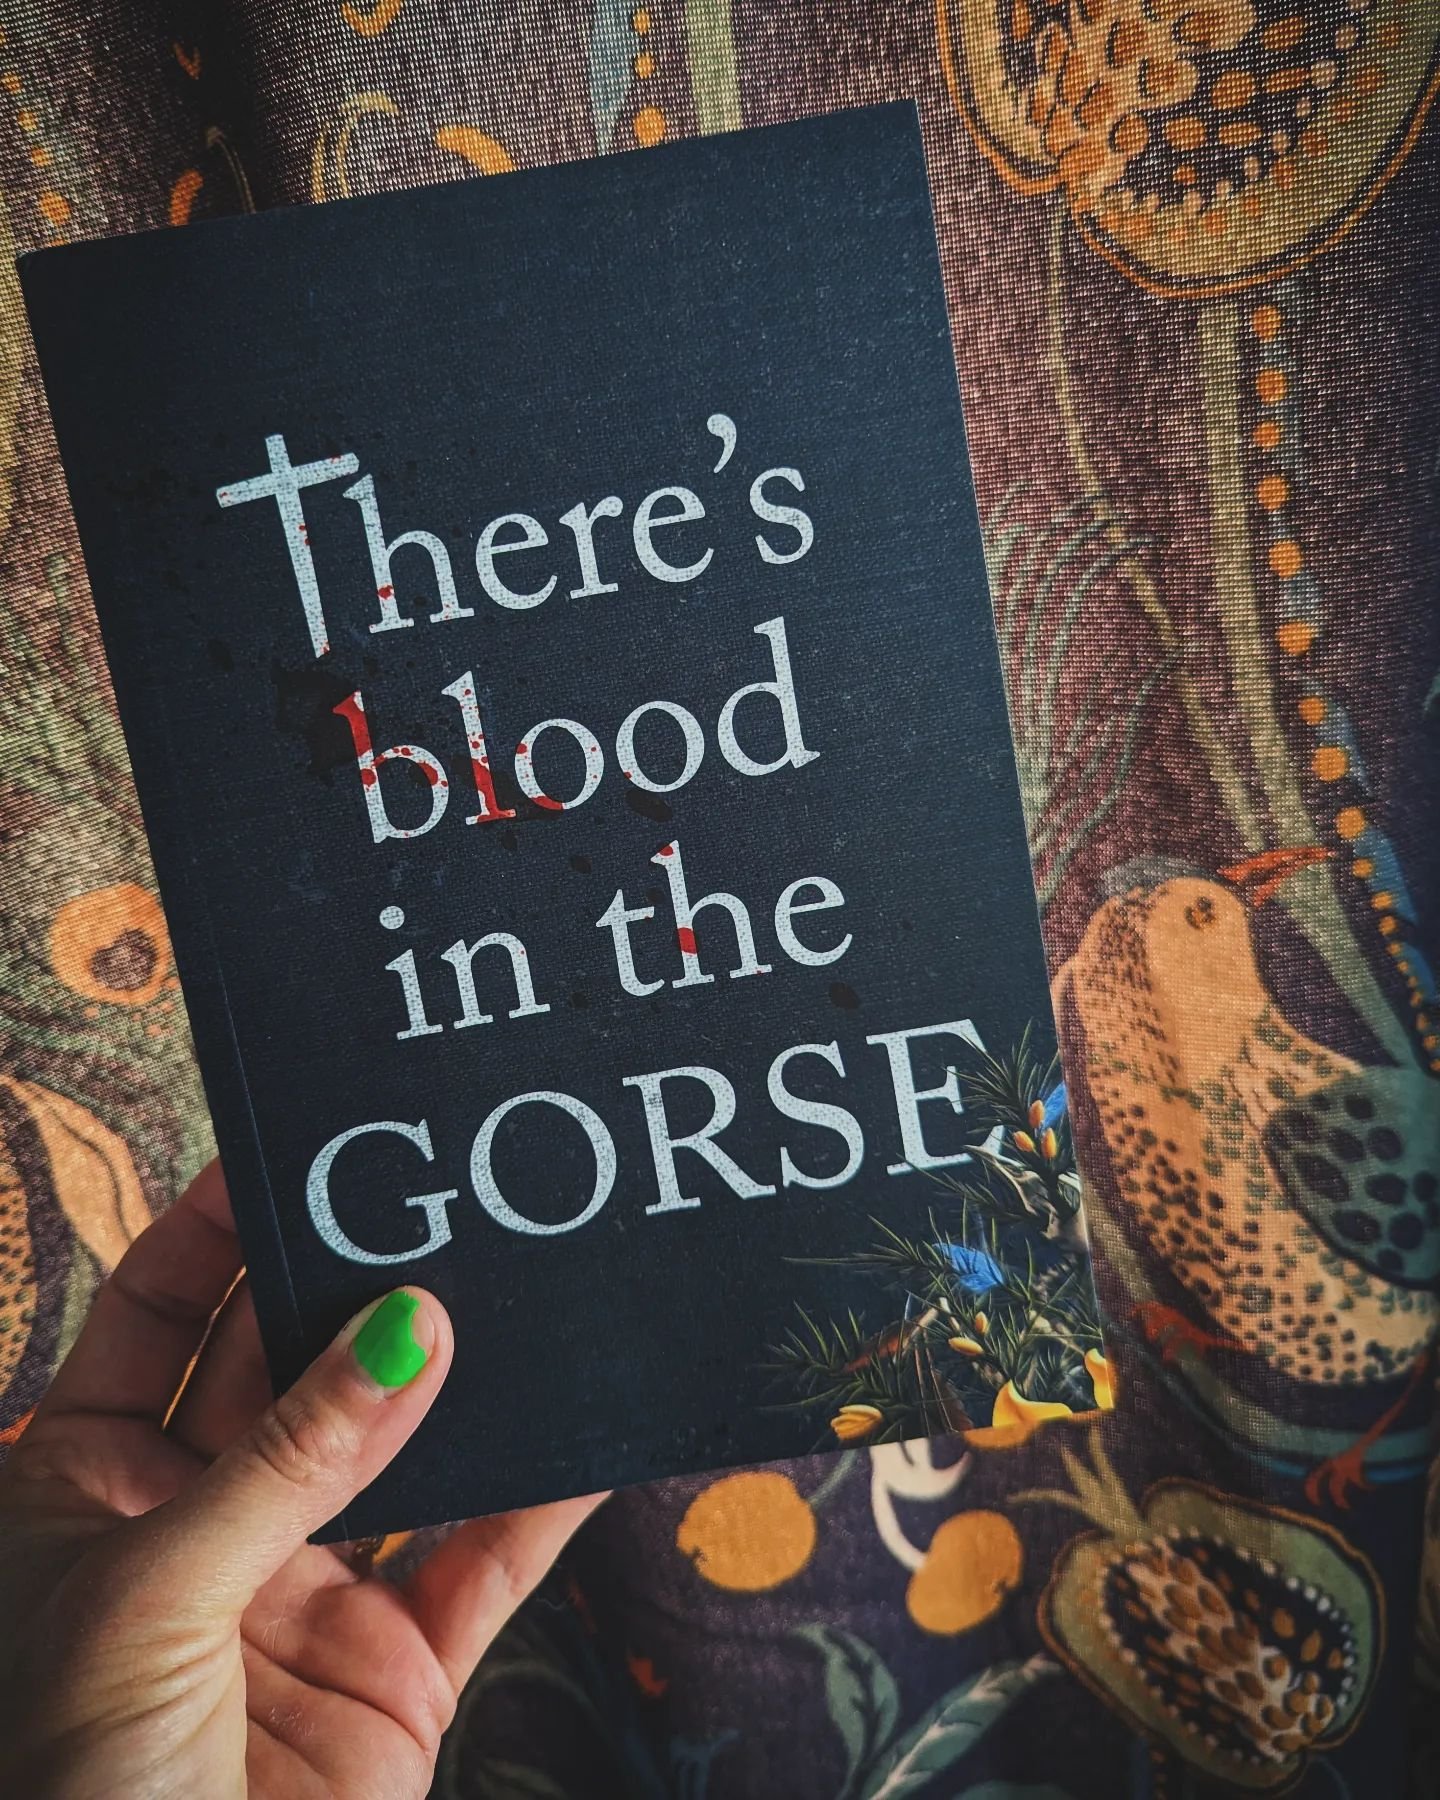 Finally got my hands on this one. Looking forward to this dark, earthy, folky read. #gorse 
.
.
.
.
#amreading #folklore #folk #gothic #debutauthor #wildflowers